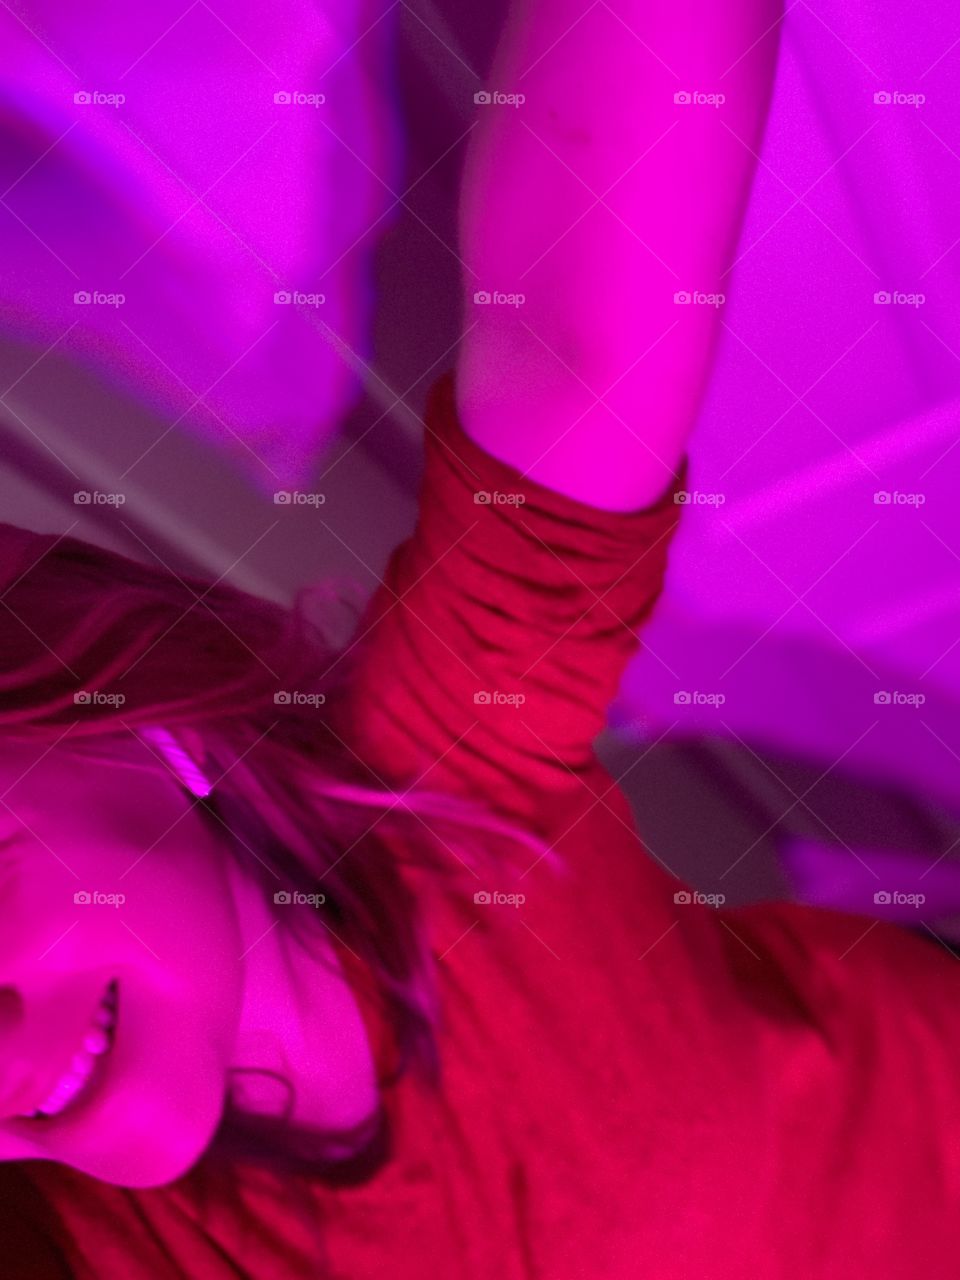 Personal House Party; Woman dancing in Pink/Magenta Light 